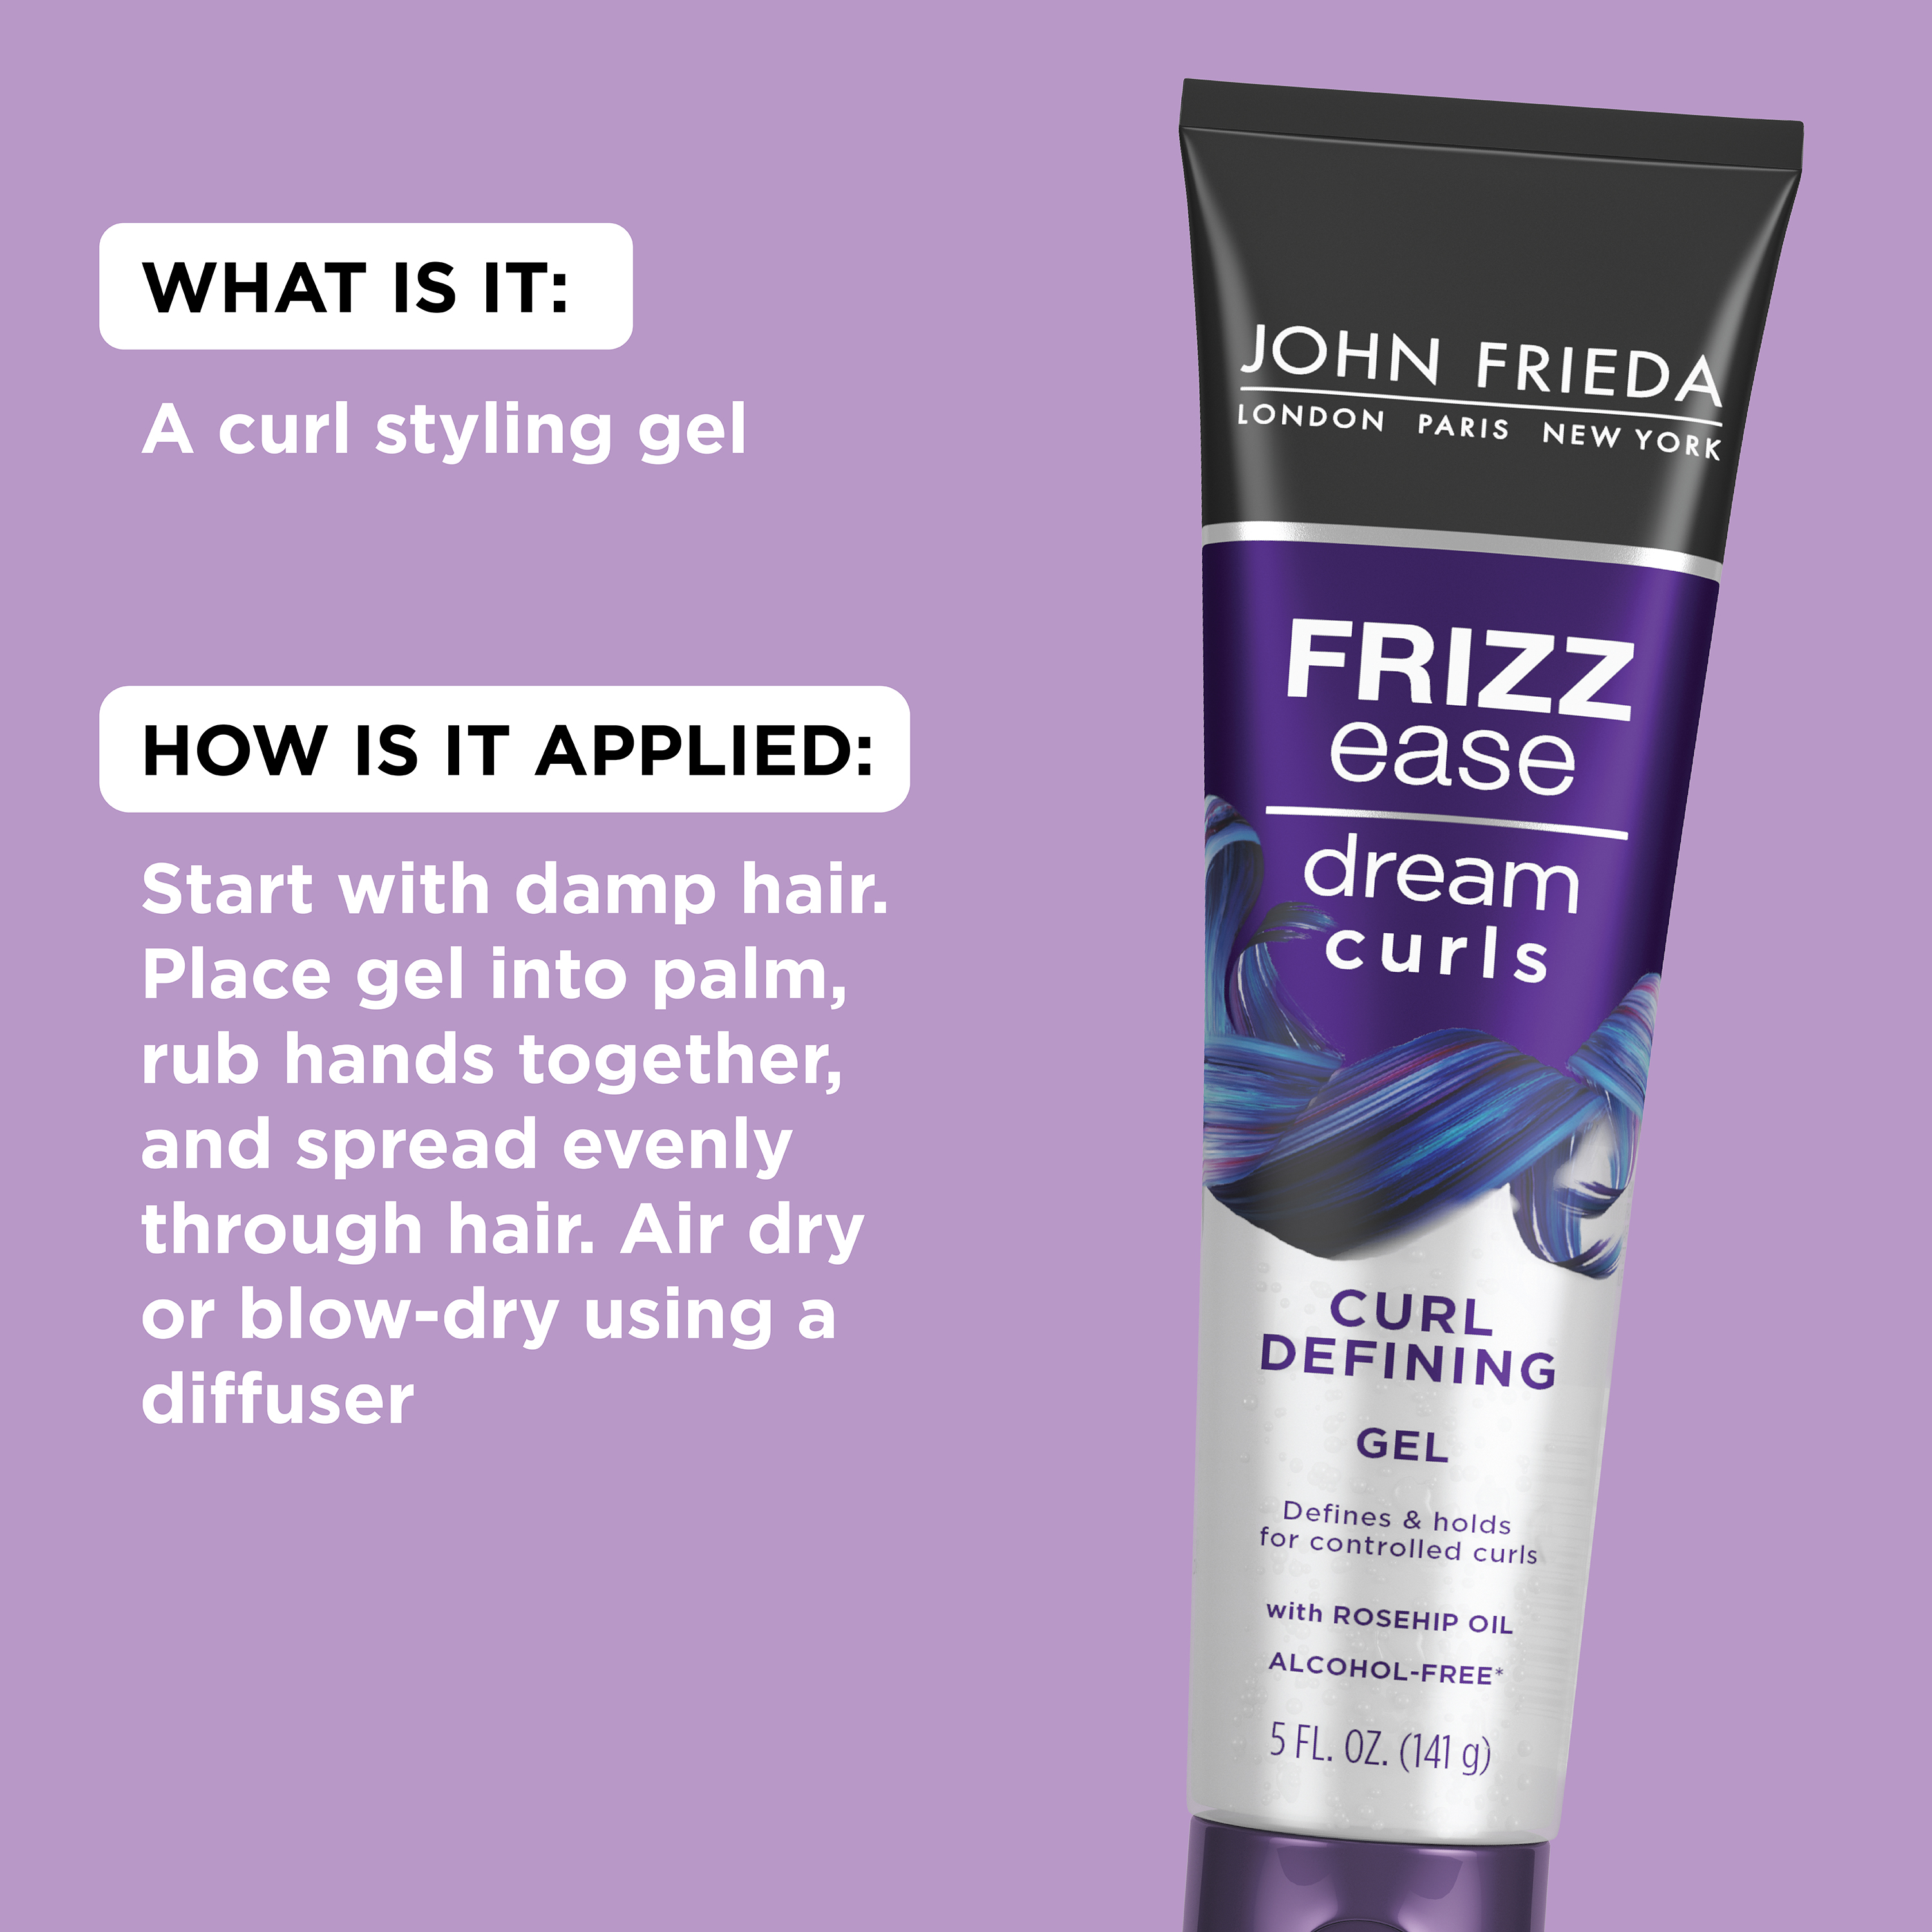 What it is: A curl styling gel. To apply it, start with damp hair. Place gel into palm, rub hands together, and spread evenly through hair. Air dry or blow-dry using a diffuser.